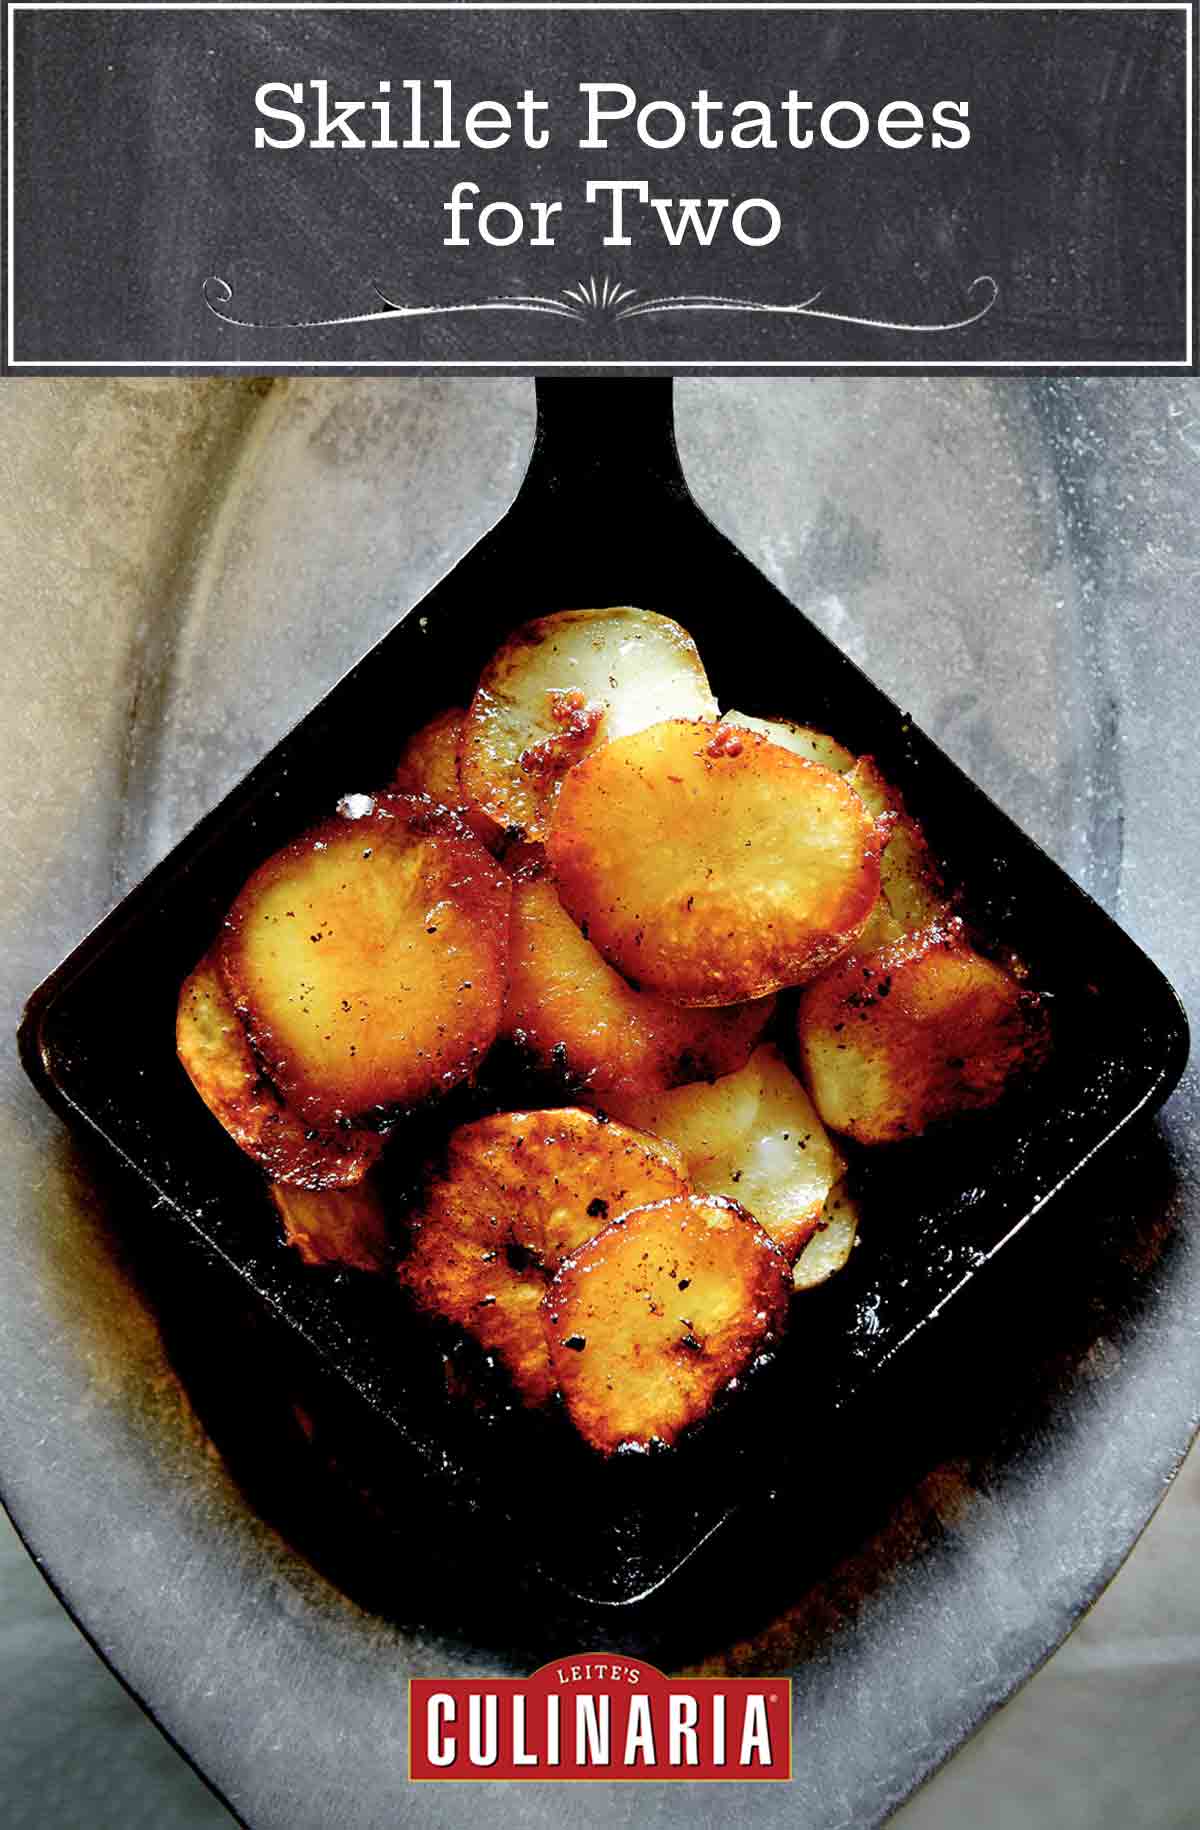 A square cast iron skillet filled with sliced fried skillet potatoes for 2 on a grey oval metal platter.